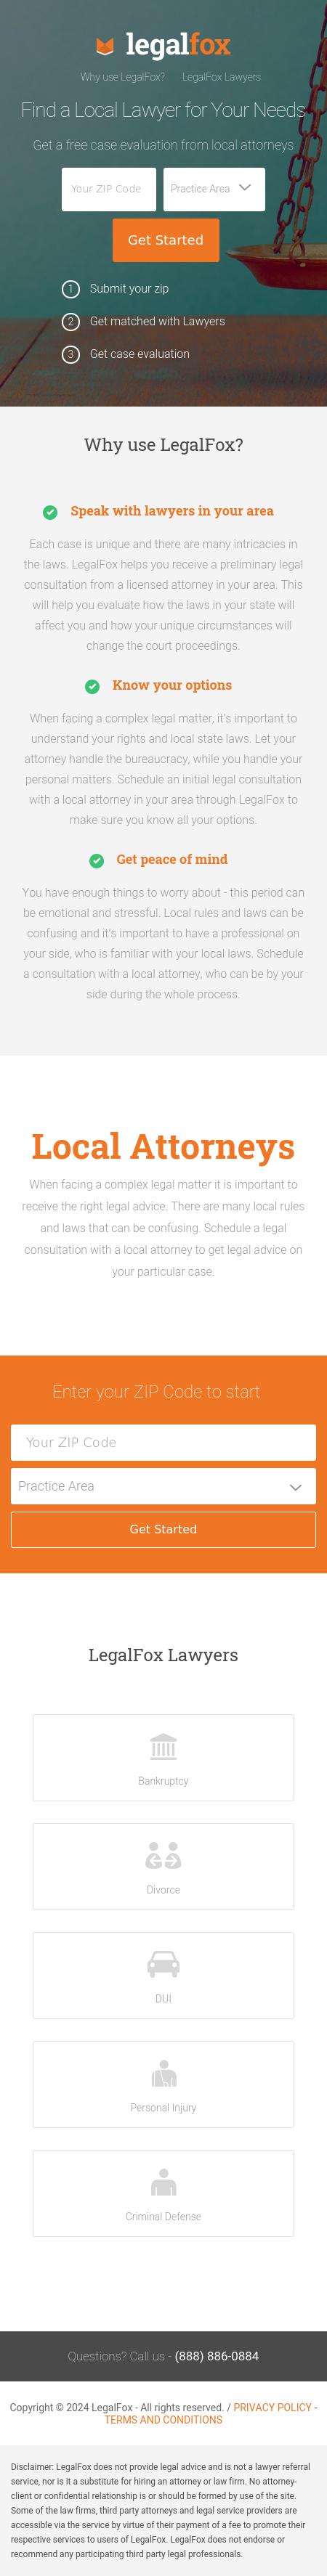 Find a Local Attorney - Jacksonville FL Lawyers